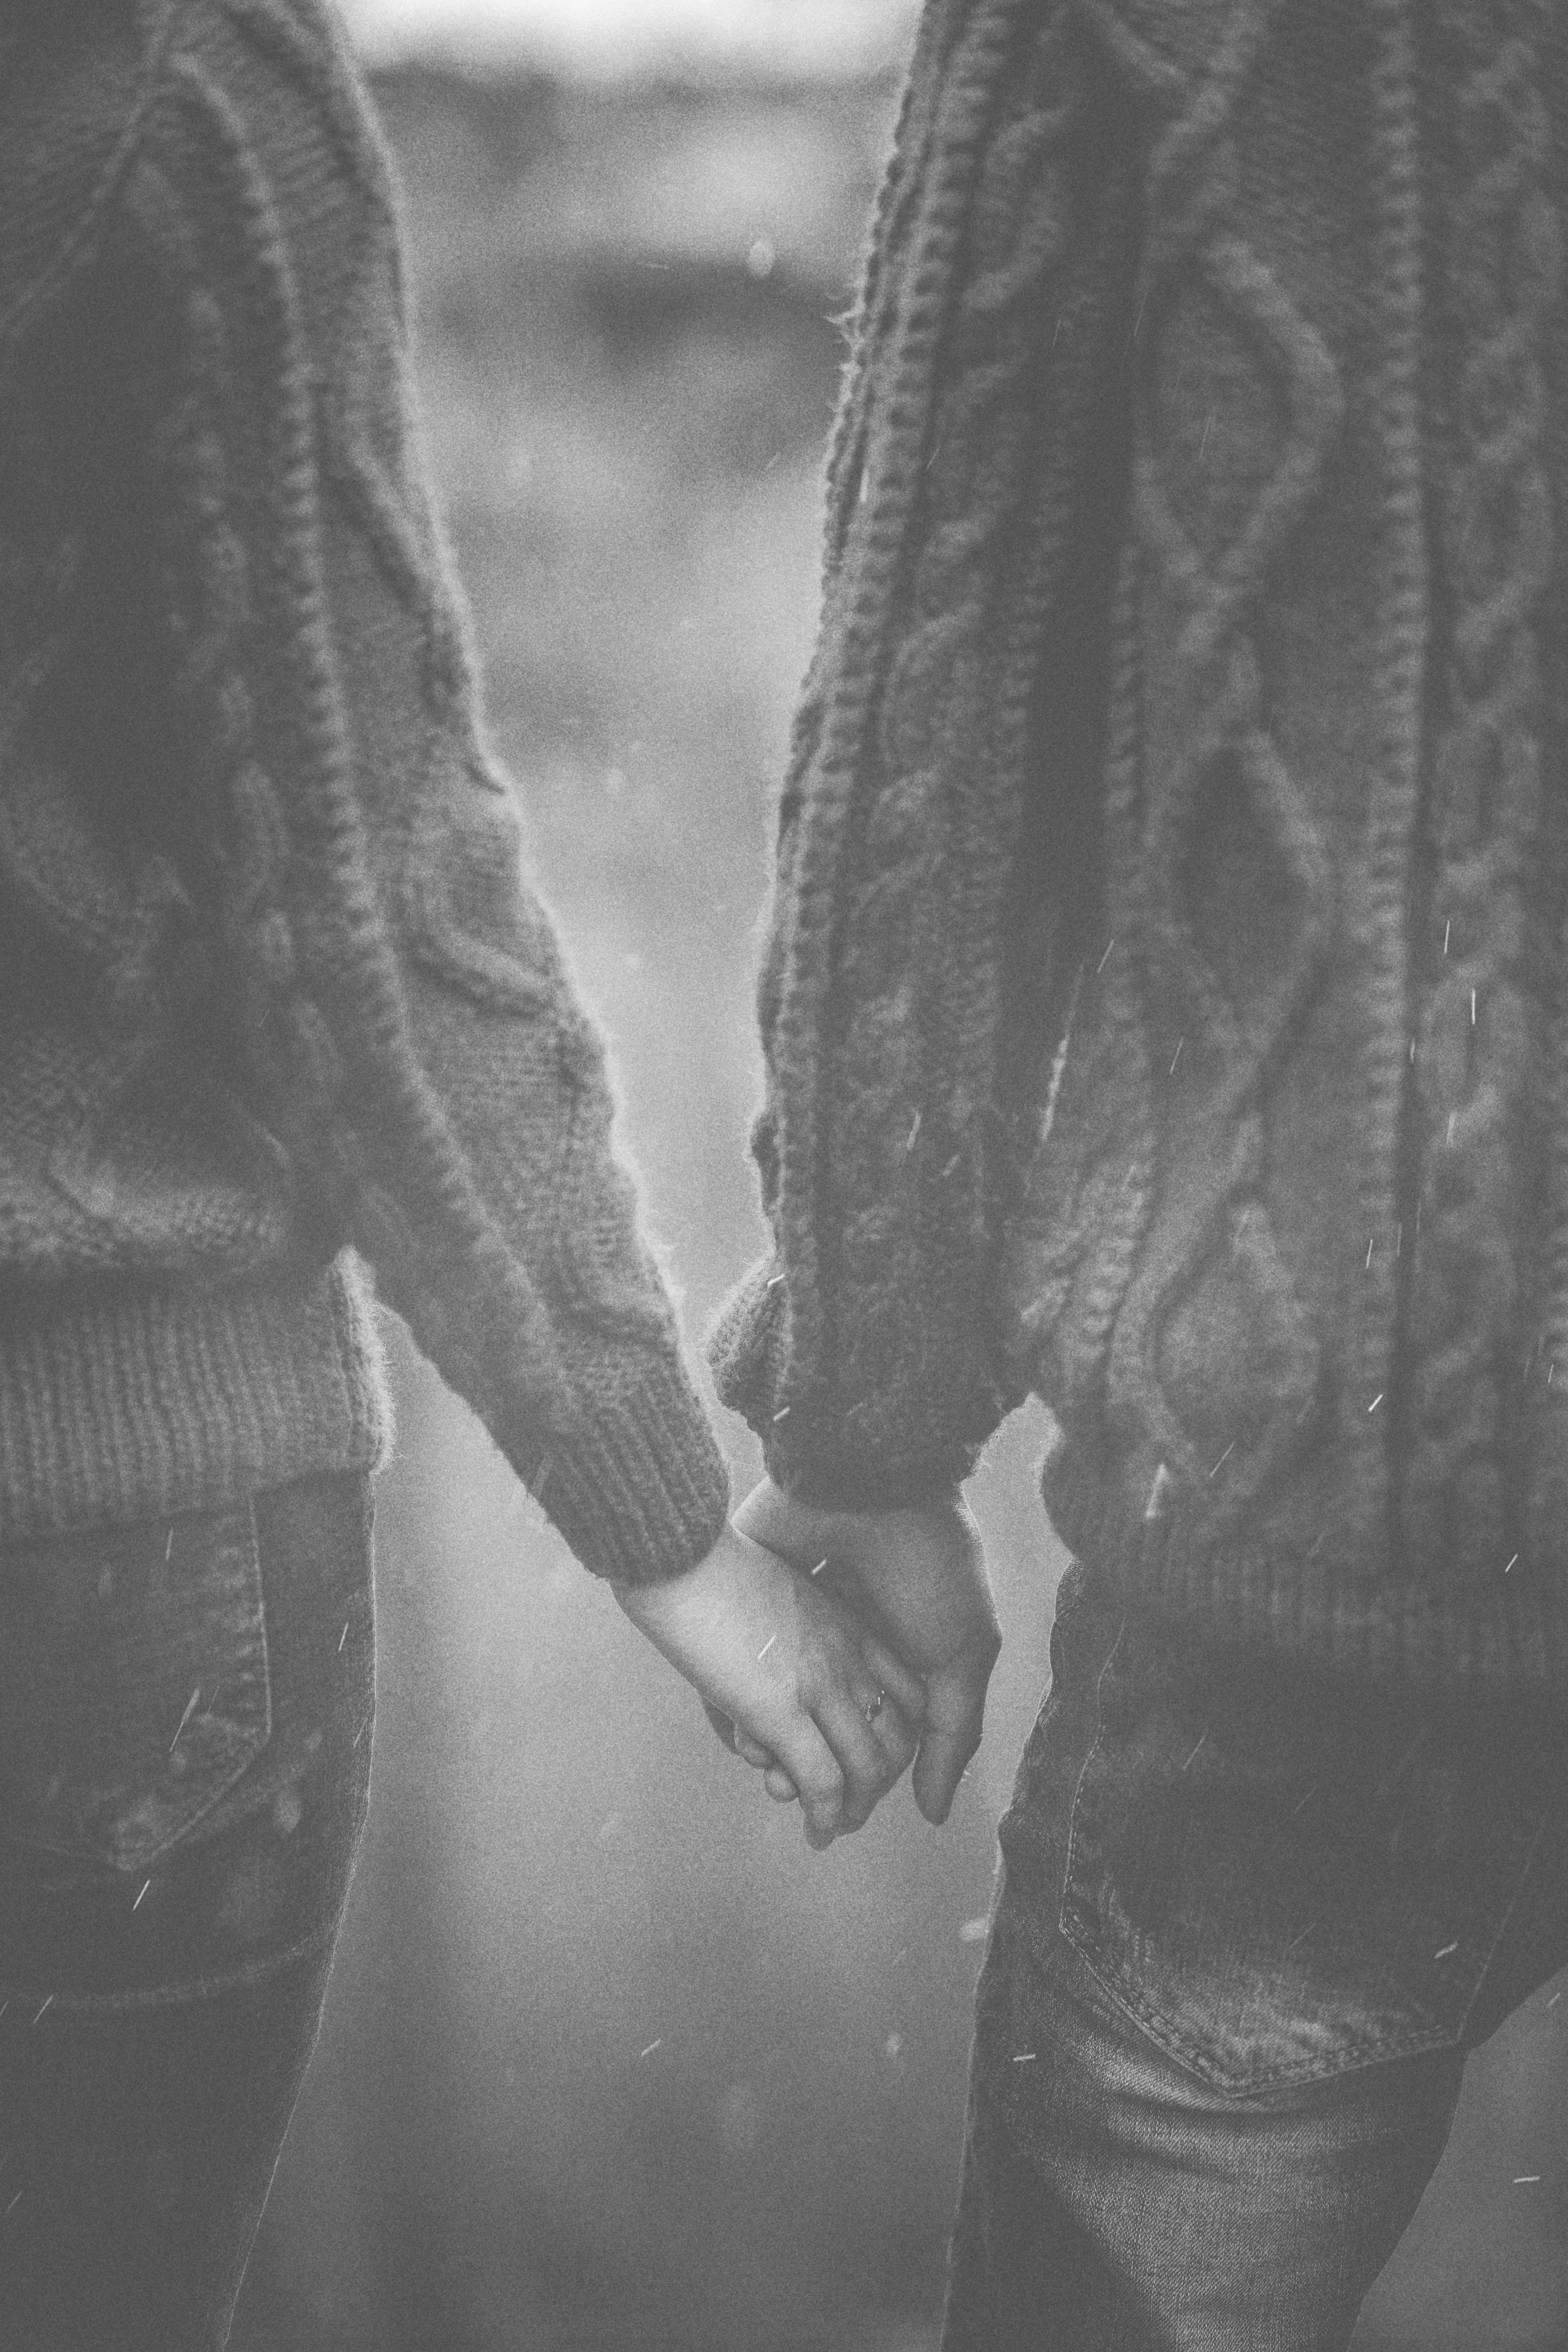 pair, couple, love, hands, bw, chb, tenderness, sweater